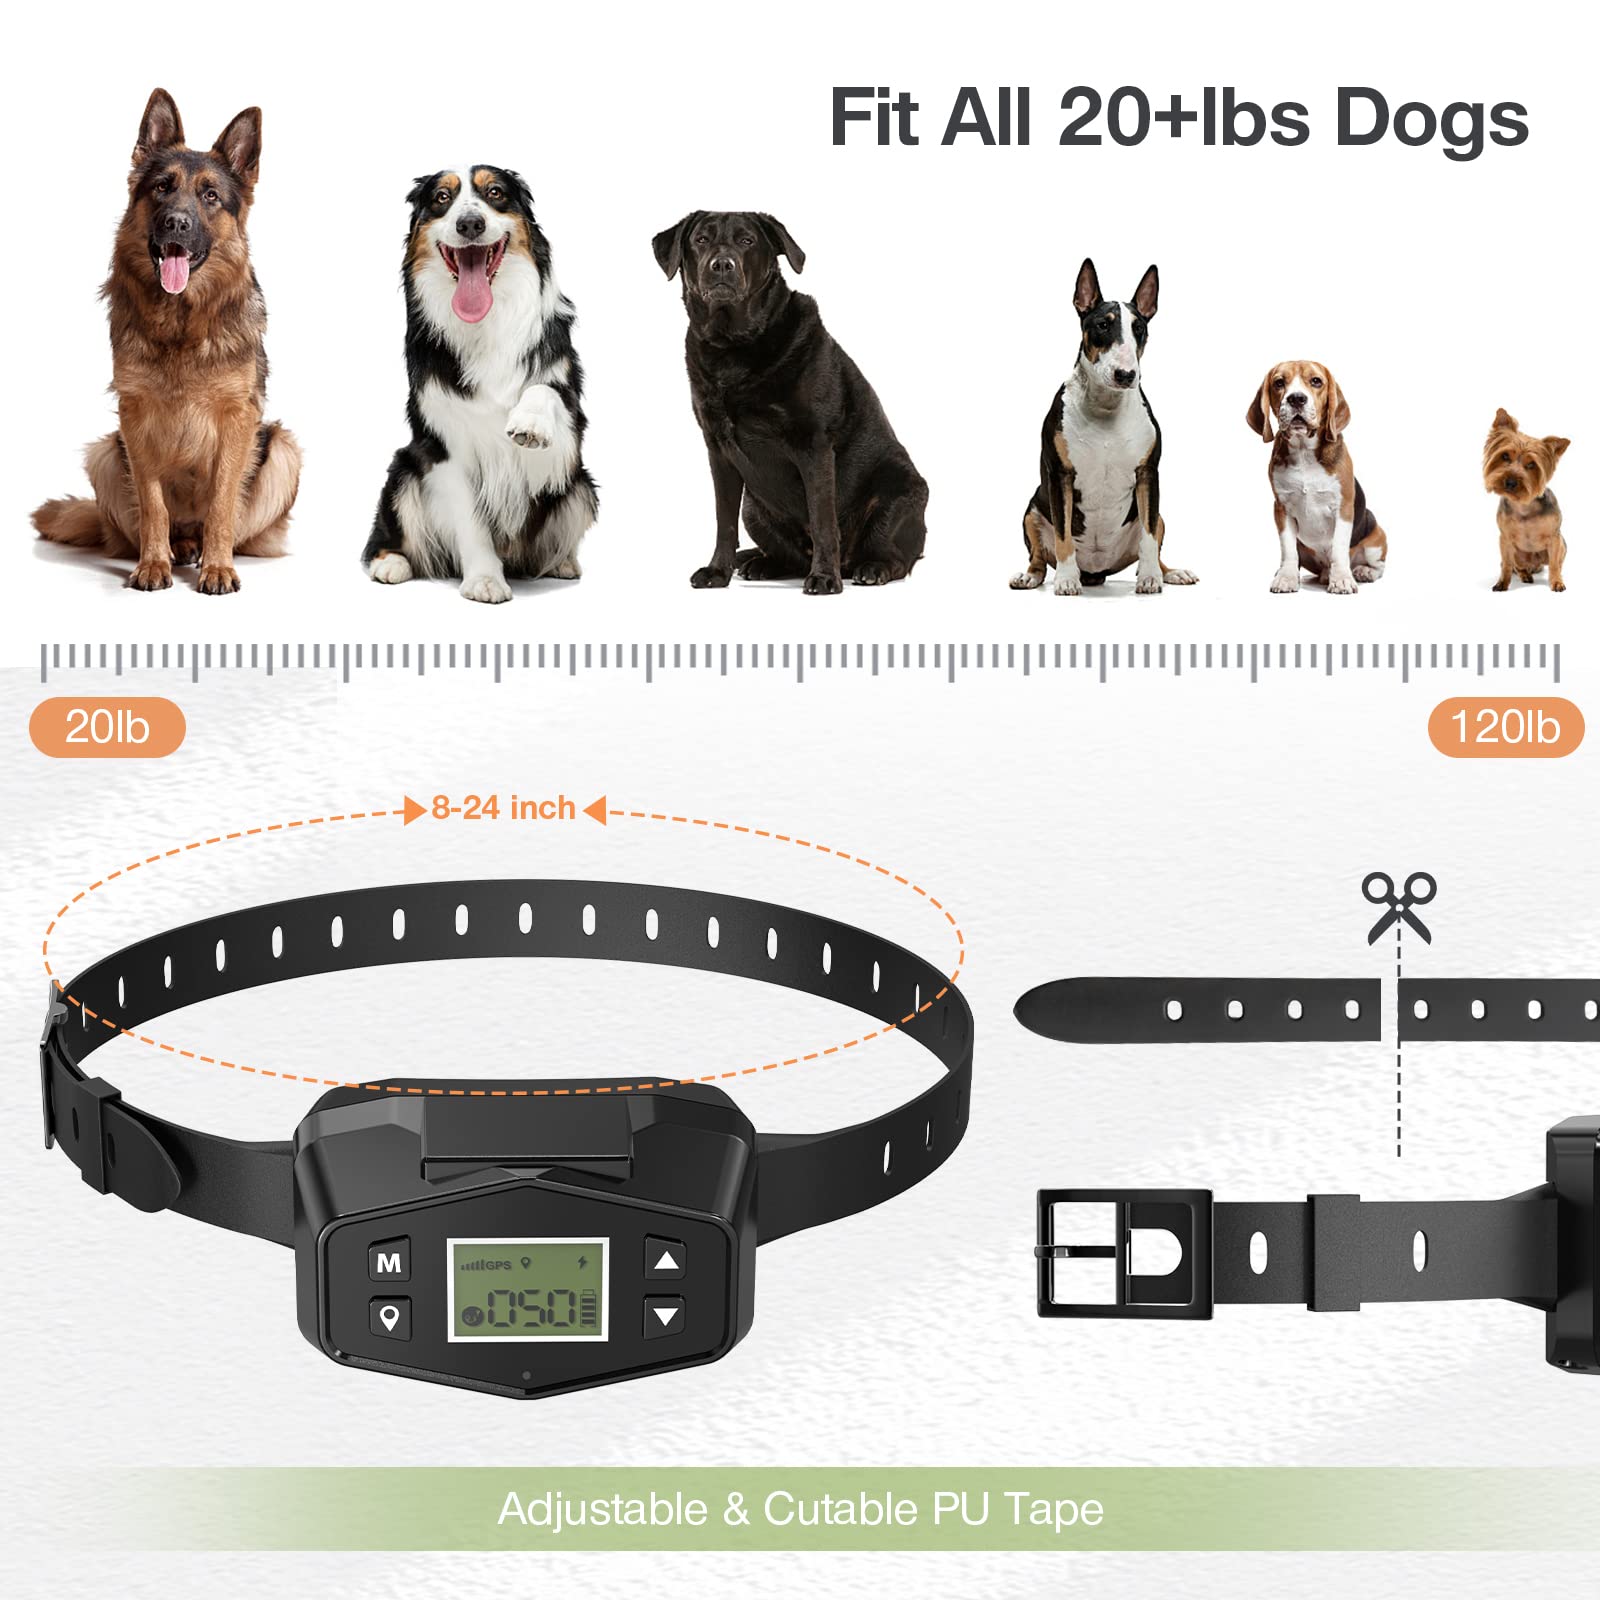 Dog Fence, 98-3280FT GPS Electric Dog Fence, Waterproof Wireless Pet Fence Collar Wireless Fence for Dogs, Pet Containment System Wireless Dog Fence System for Large Dog Training Outdoor